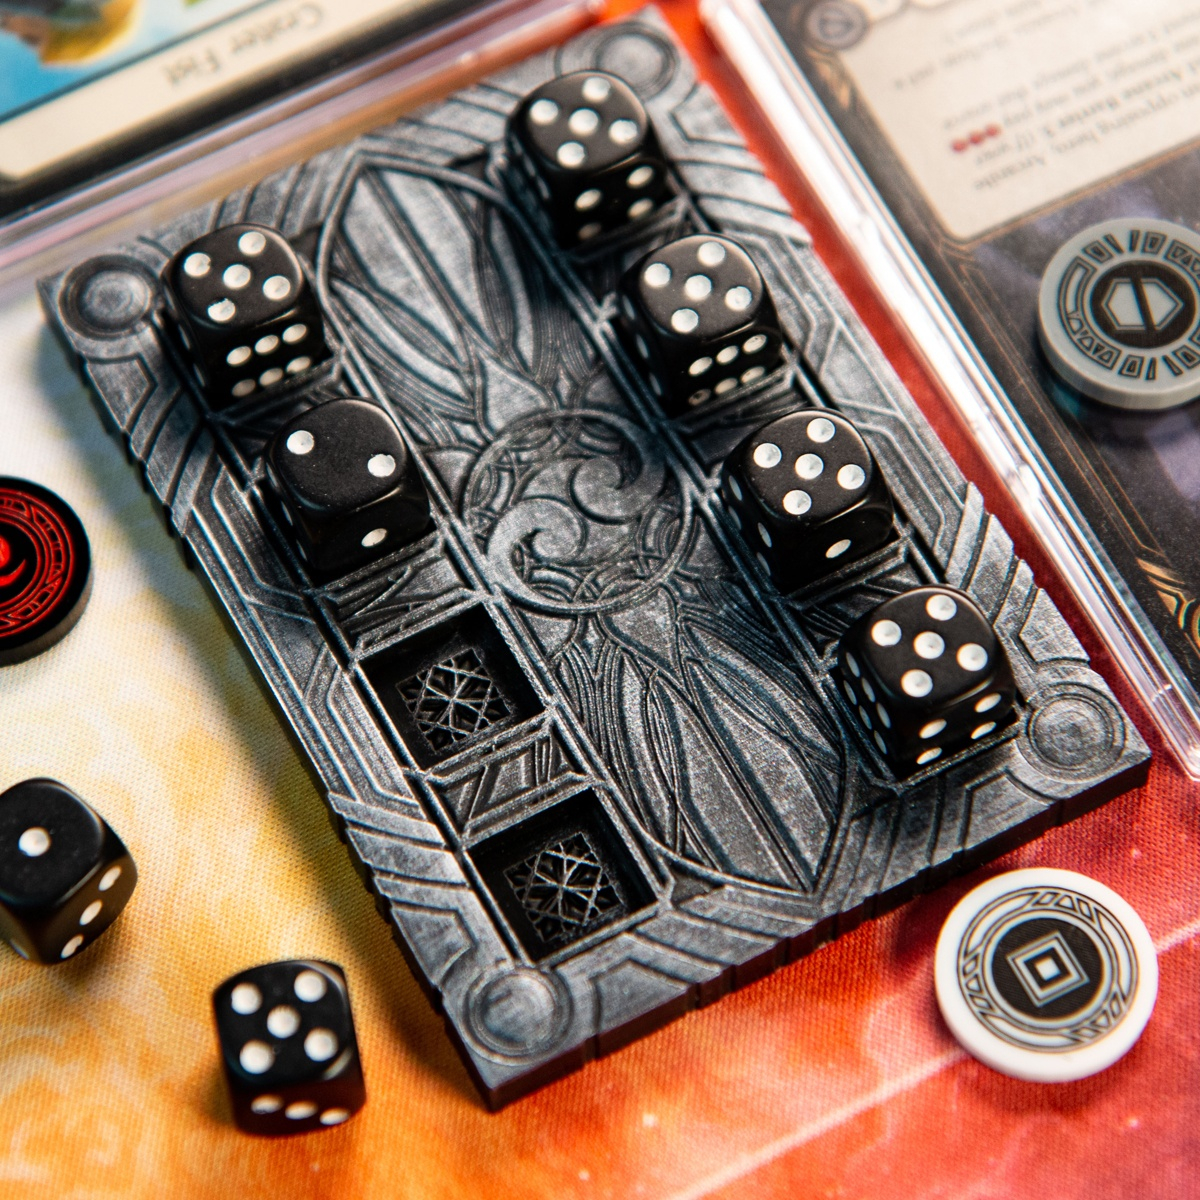 Majestic Dice Board - Battleworn Edition mostly full of dice, surrounded by tokens from the Majestic Token Set as well as cards from Flesh and Blood TCG